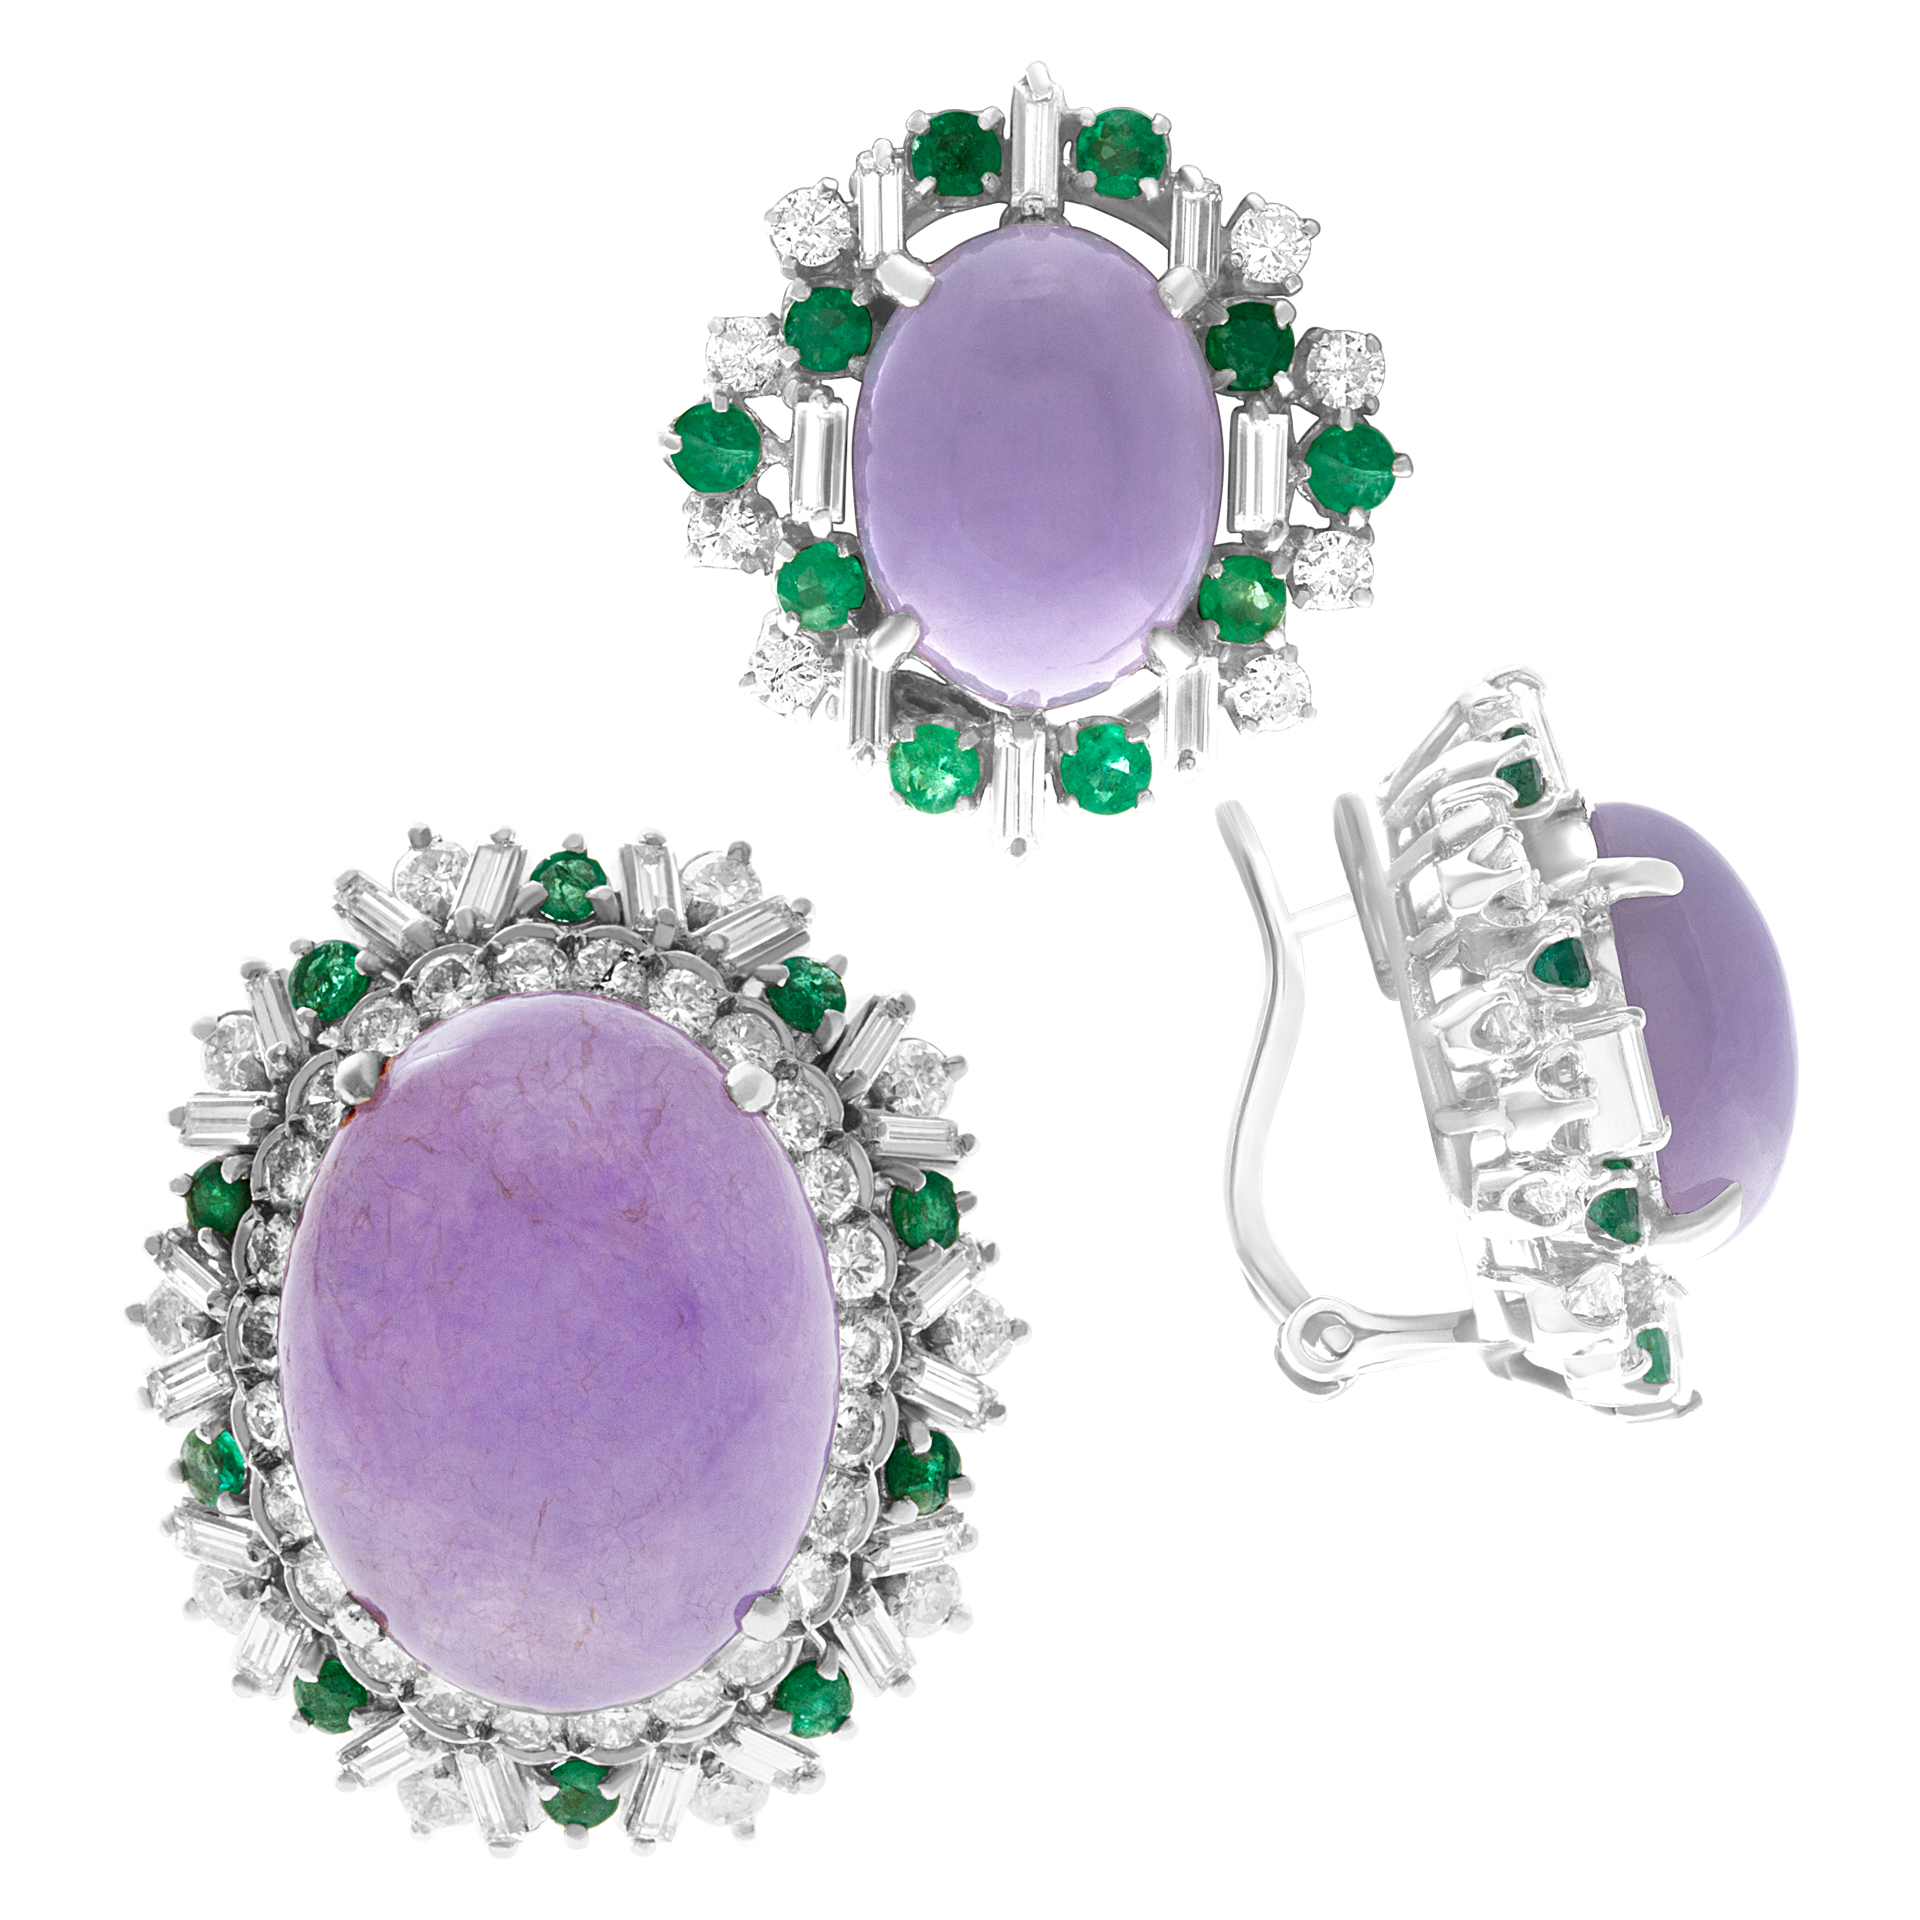 Lovely quartz earrings in 18k white gold with emerald and diamond accents